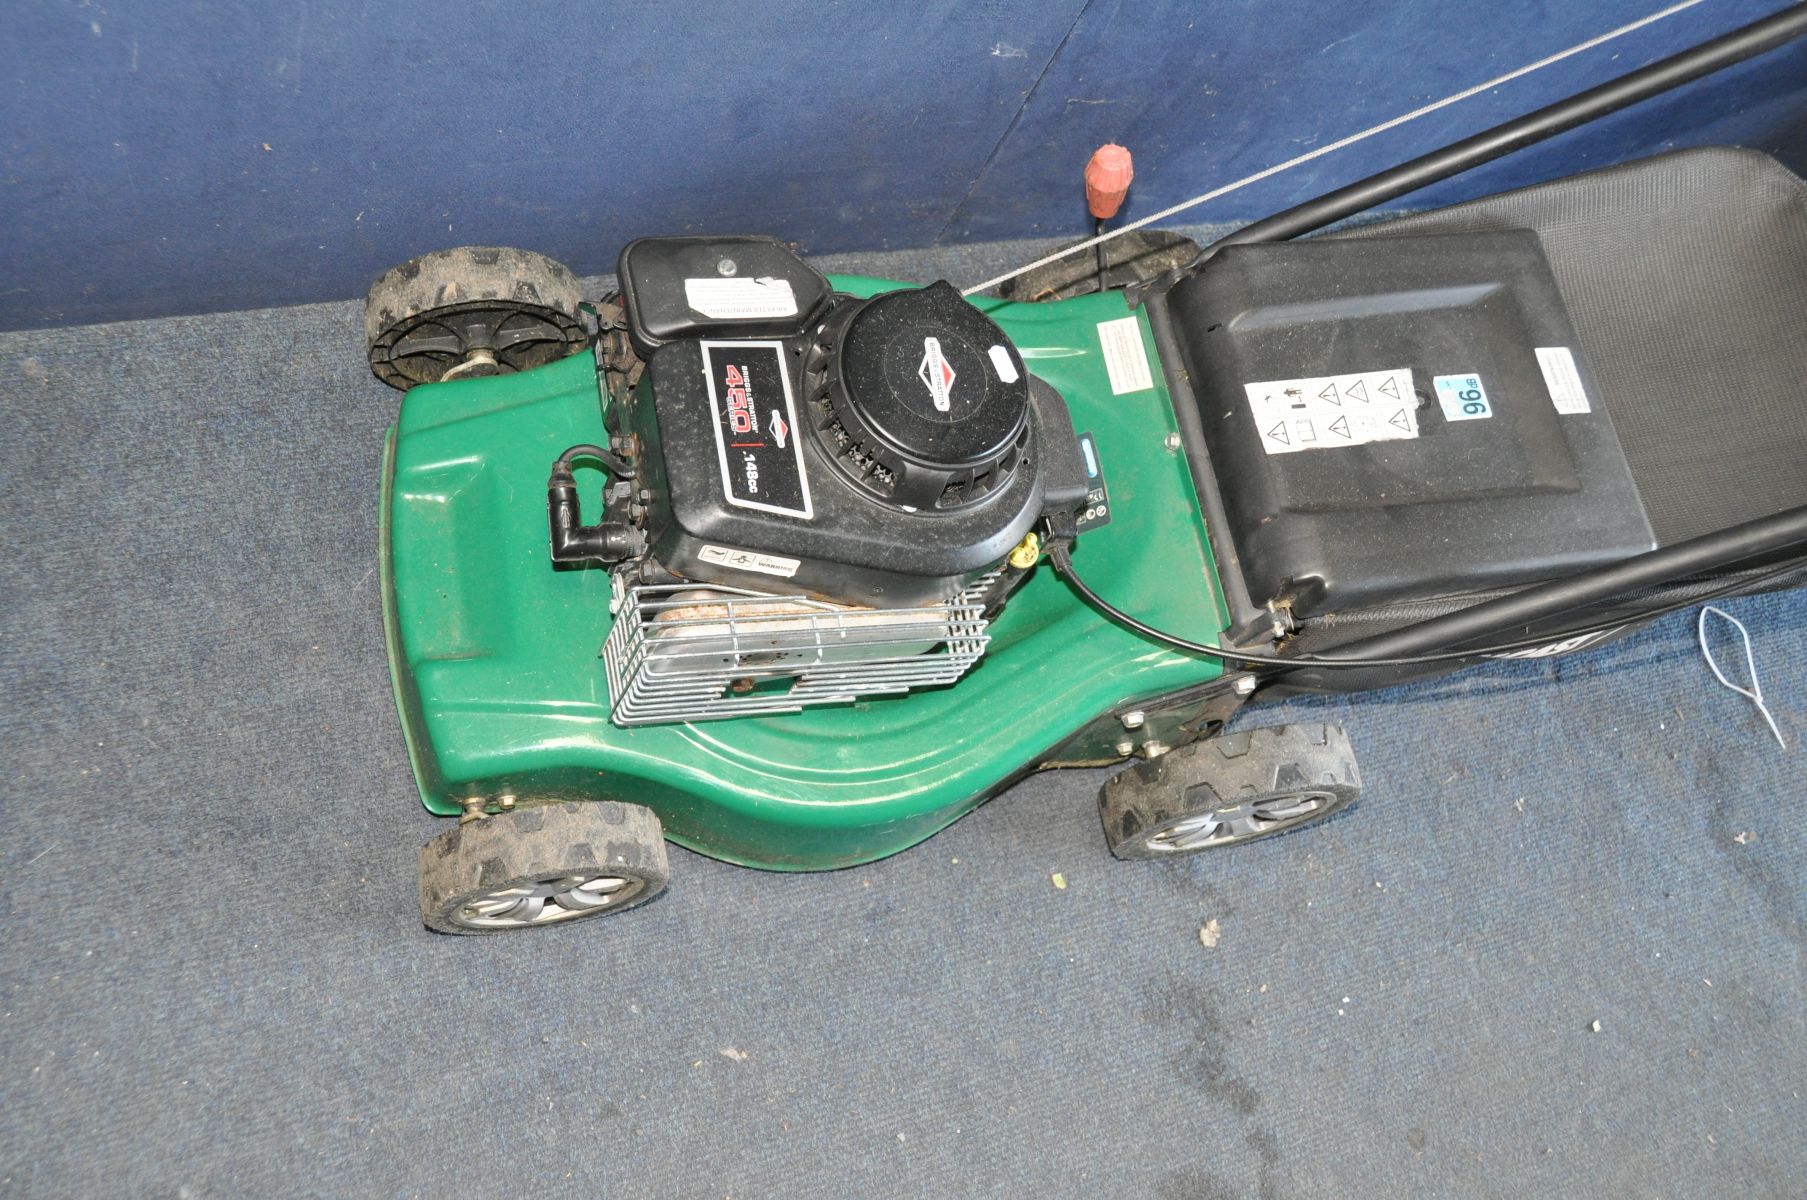 A QUALCAST XSS41C PETROL LAWN MOWER with a Briggs and Stratton 450 series engine - Image 2 of 2